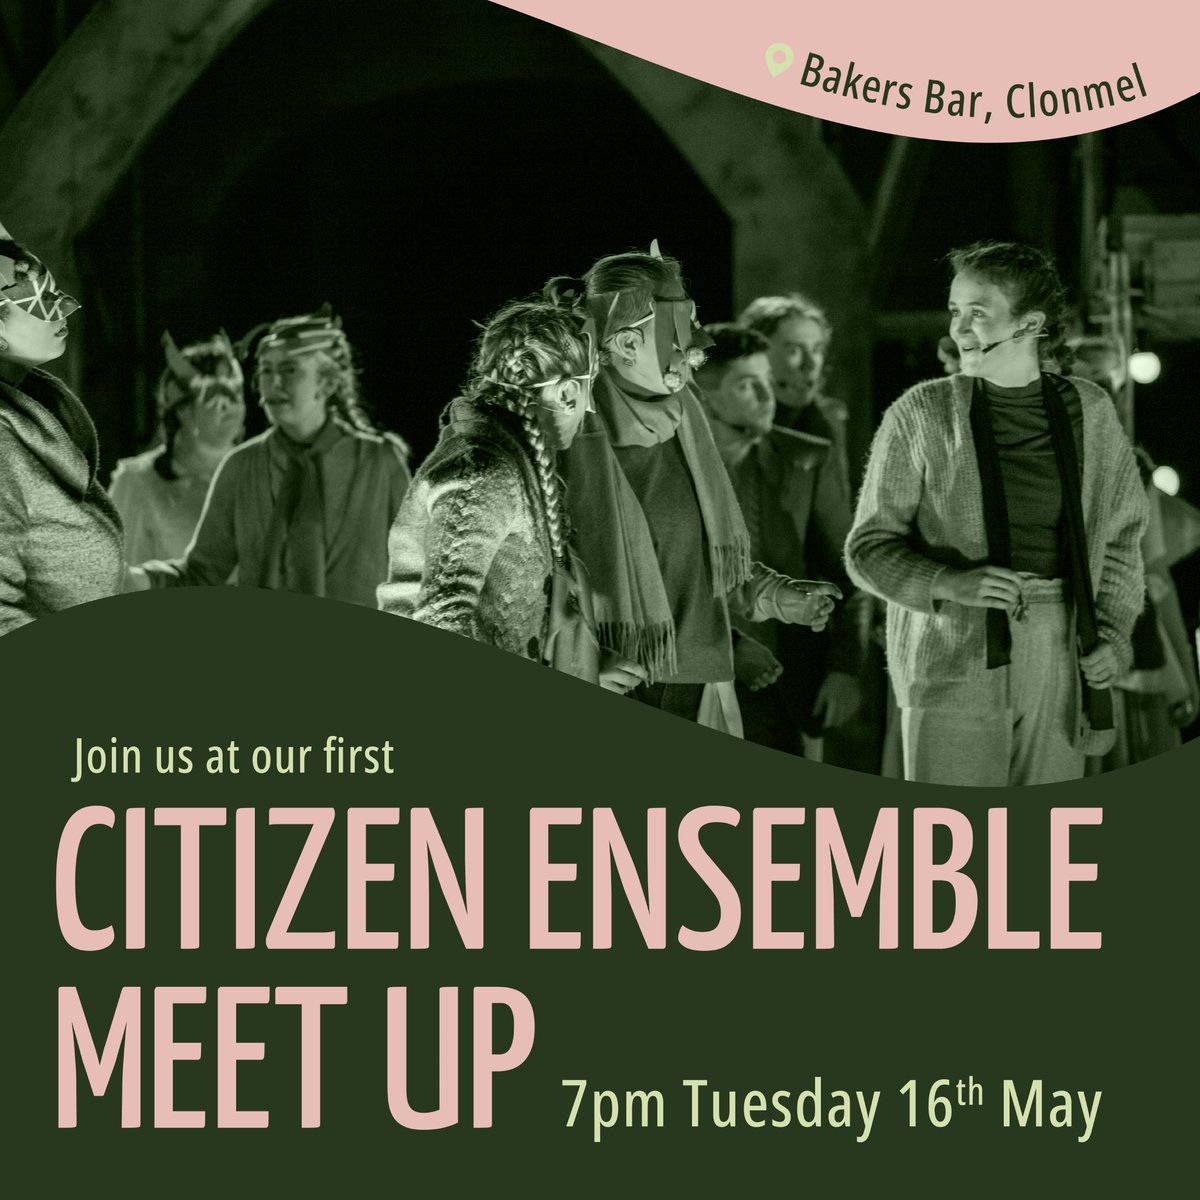 Clear your calendar as we have something very special in store for you 🤩

Next Tuesday evening we will be holding our first citizen ensemble meeting  🙌

✨Join us ✨

🕰  7 pm

📅 Tuesday 16th May

📍 Bakers Bar, Clonmel

#Art2023 #ClonmelArts #DecadeOfCentenaries